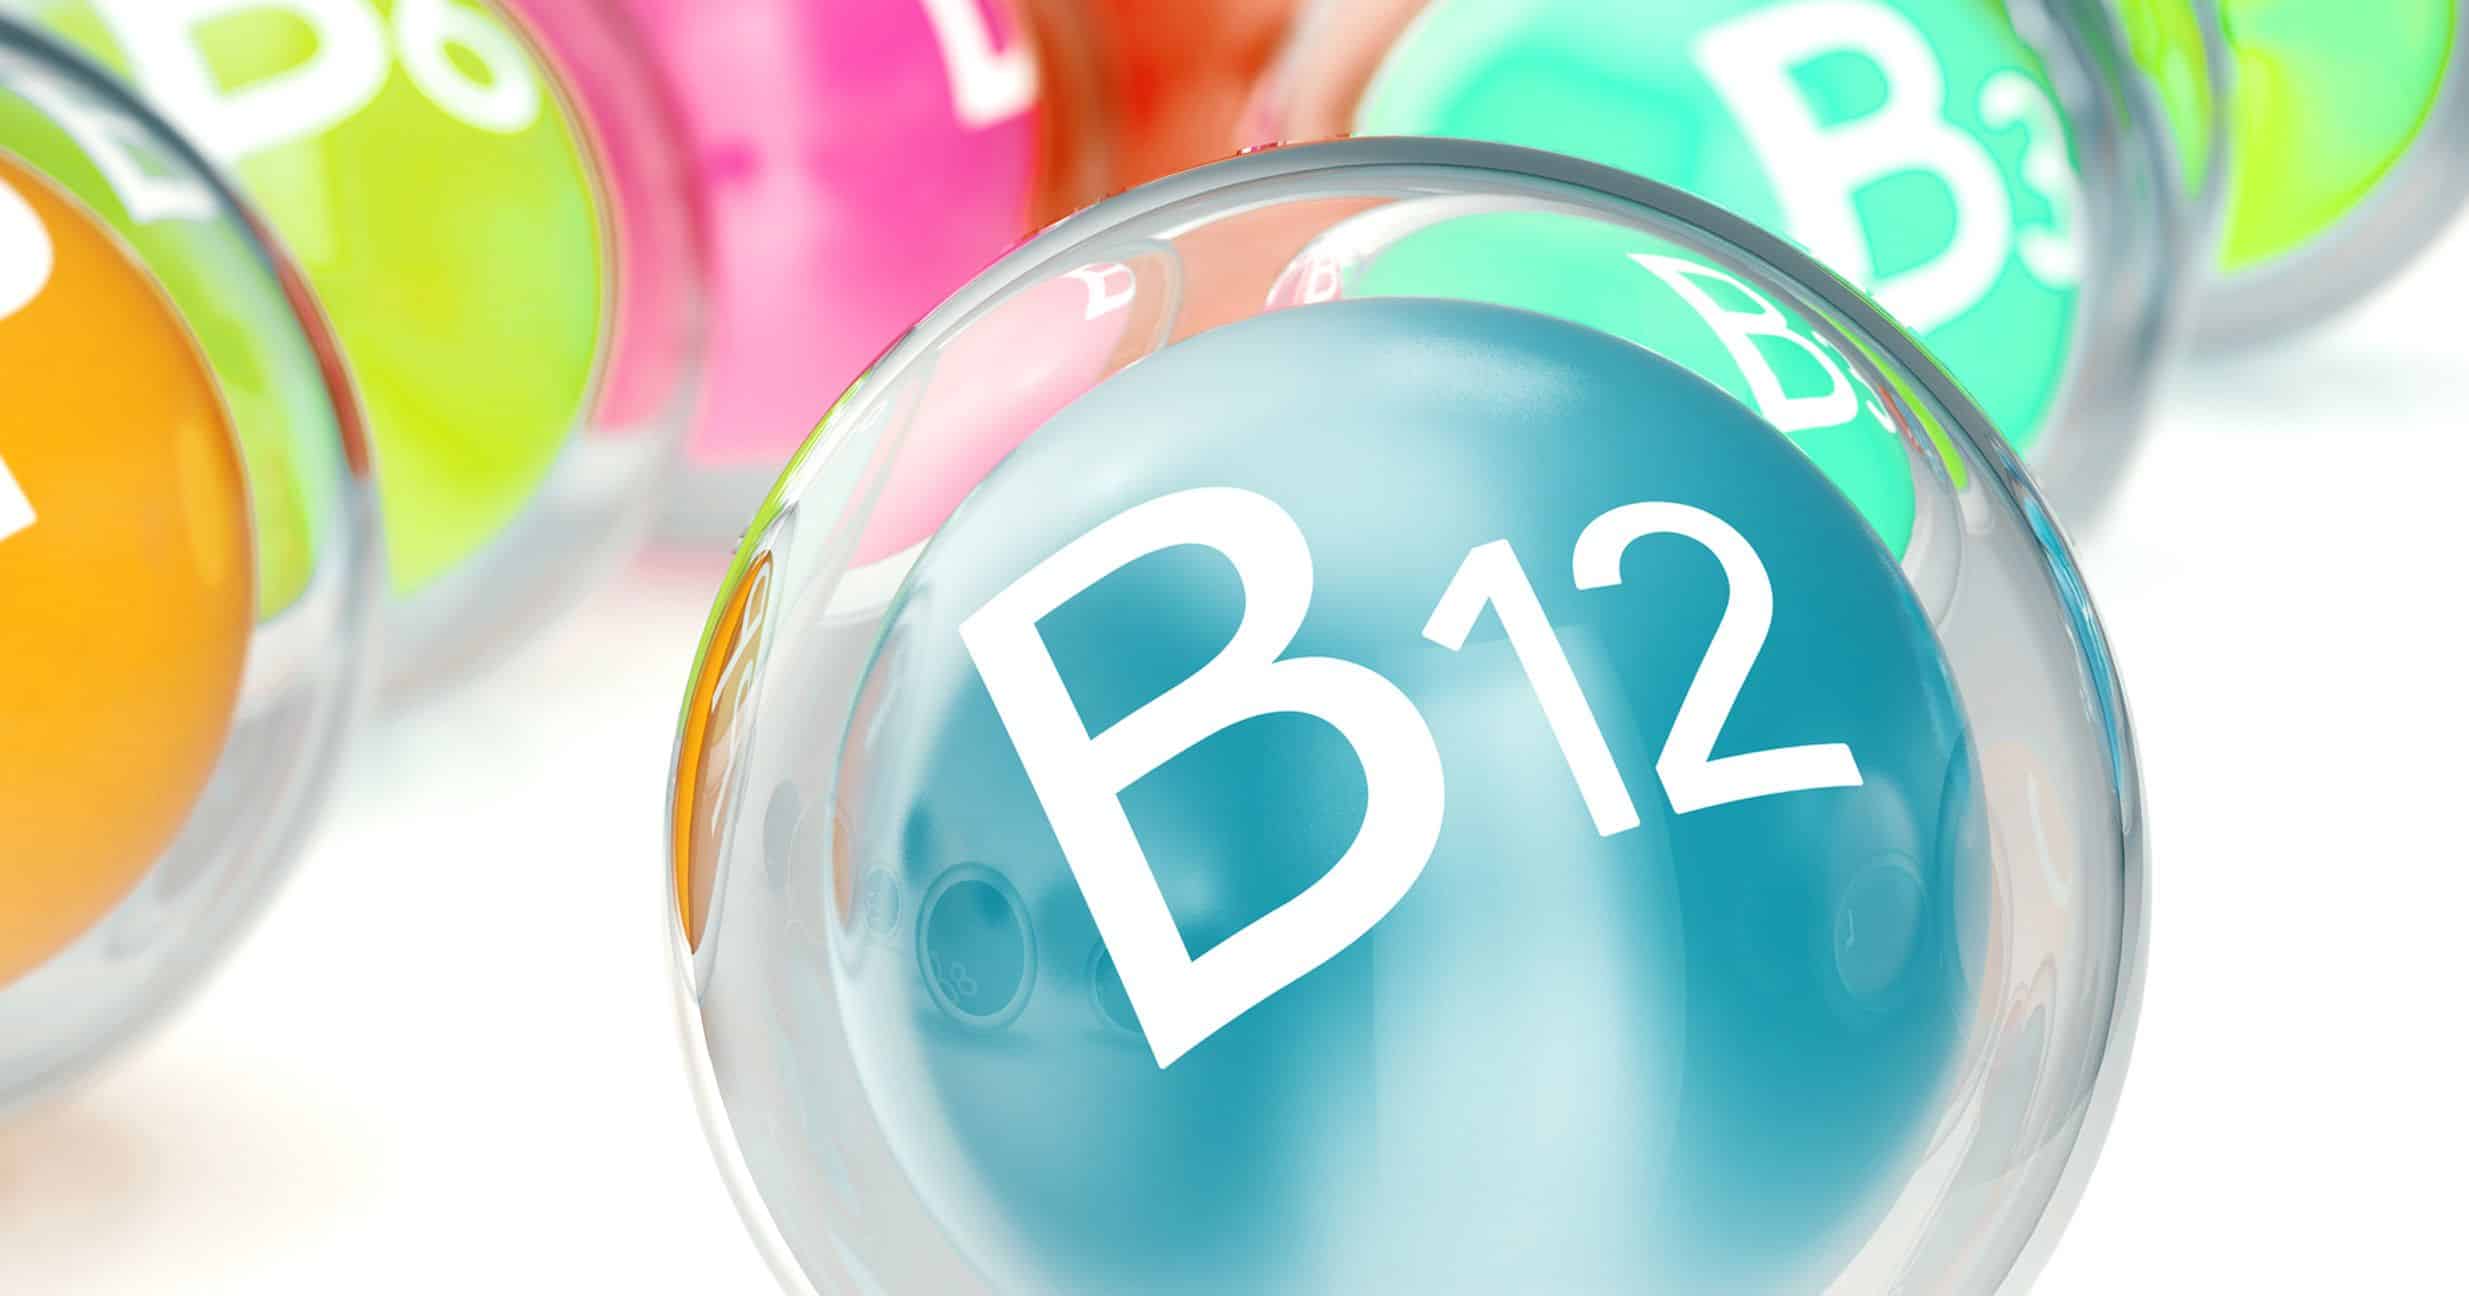 B12 spheres on a table